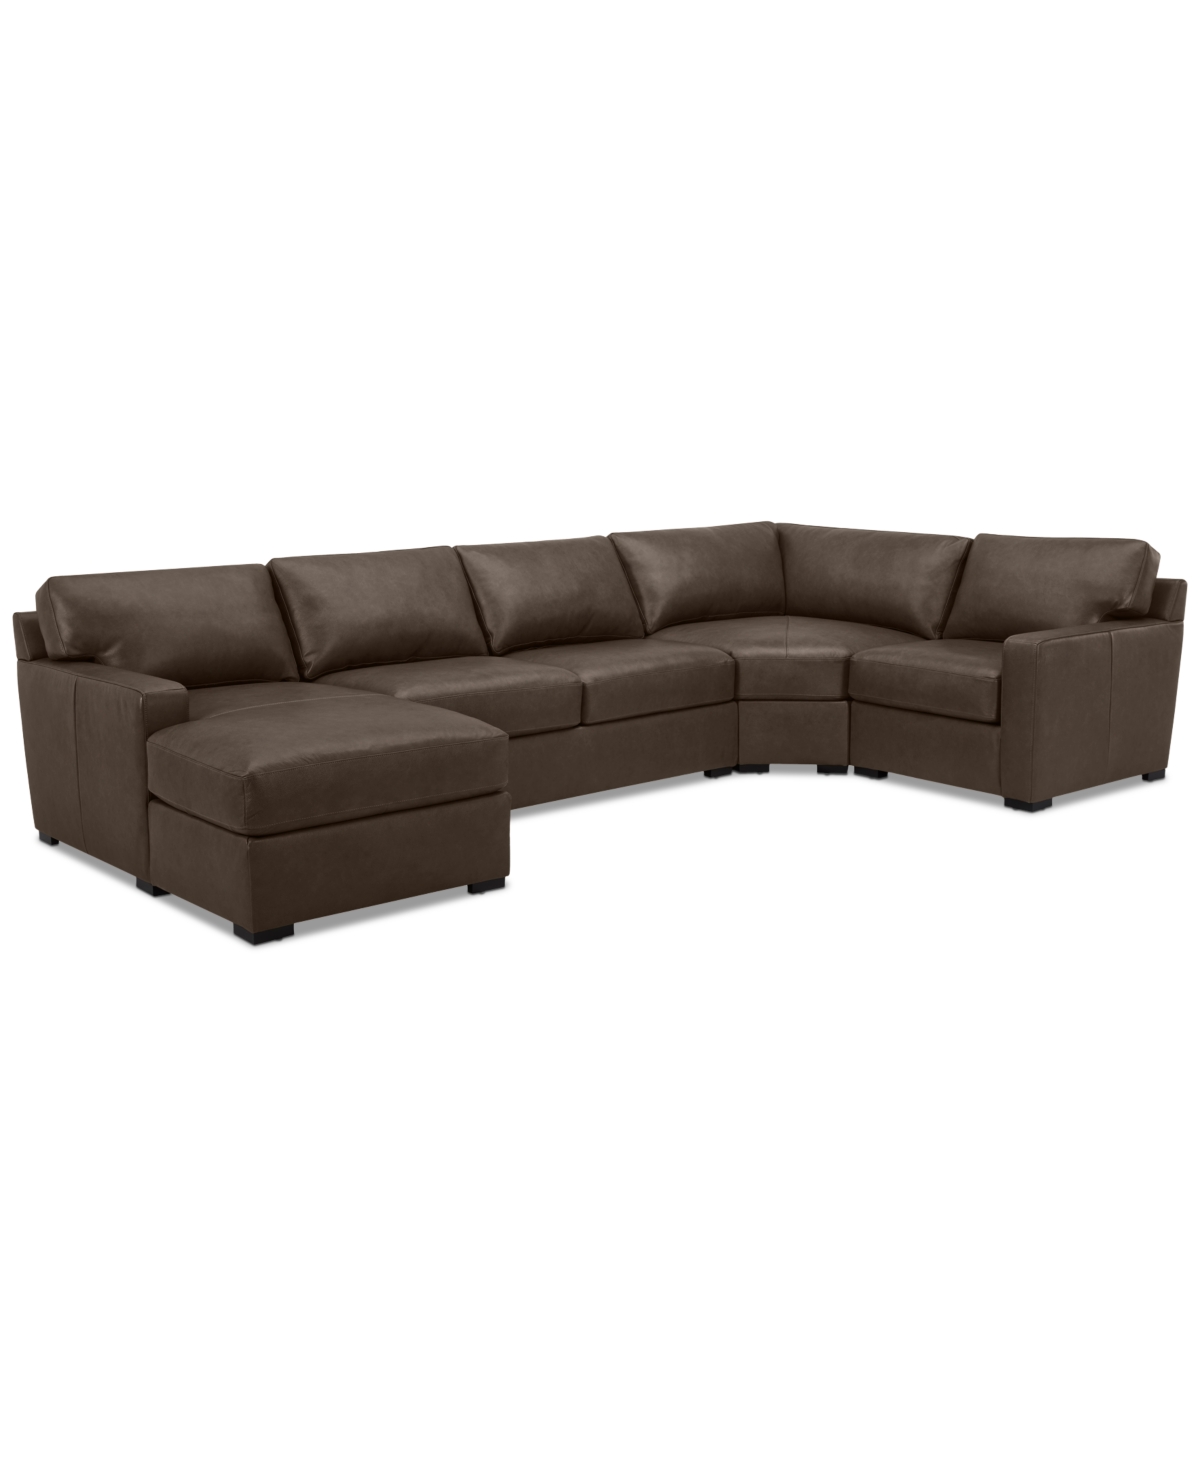 Macy's Radley 148" 4-pc. Leather Wedge Modular Chaise Sectional, Created For  In Chocolate